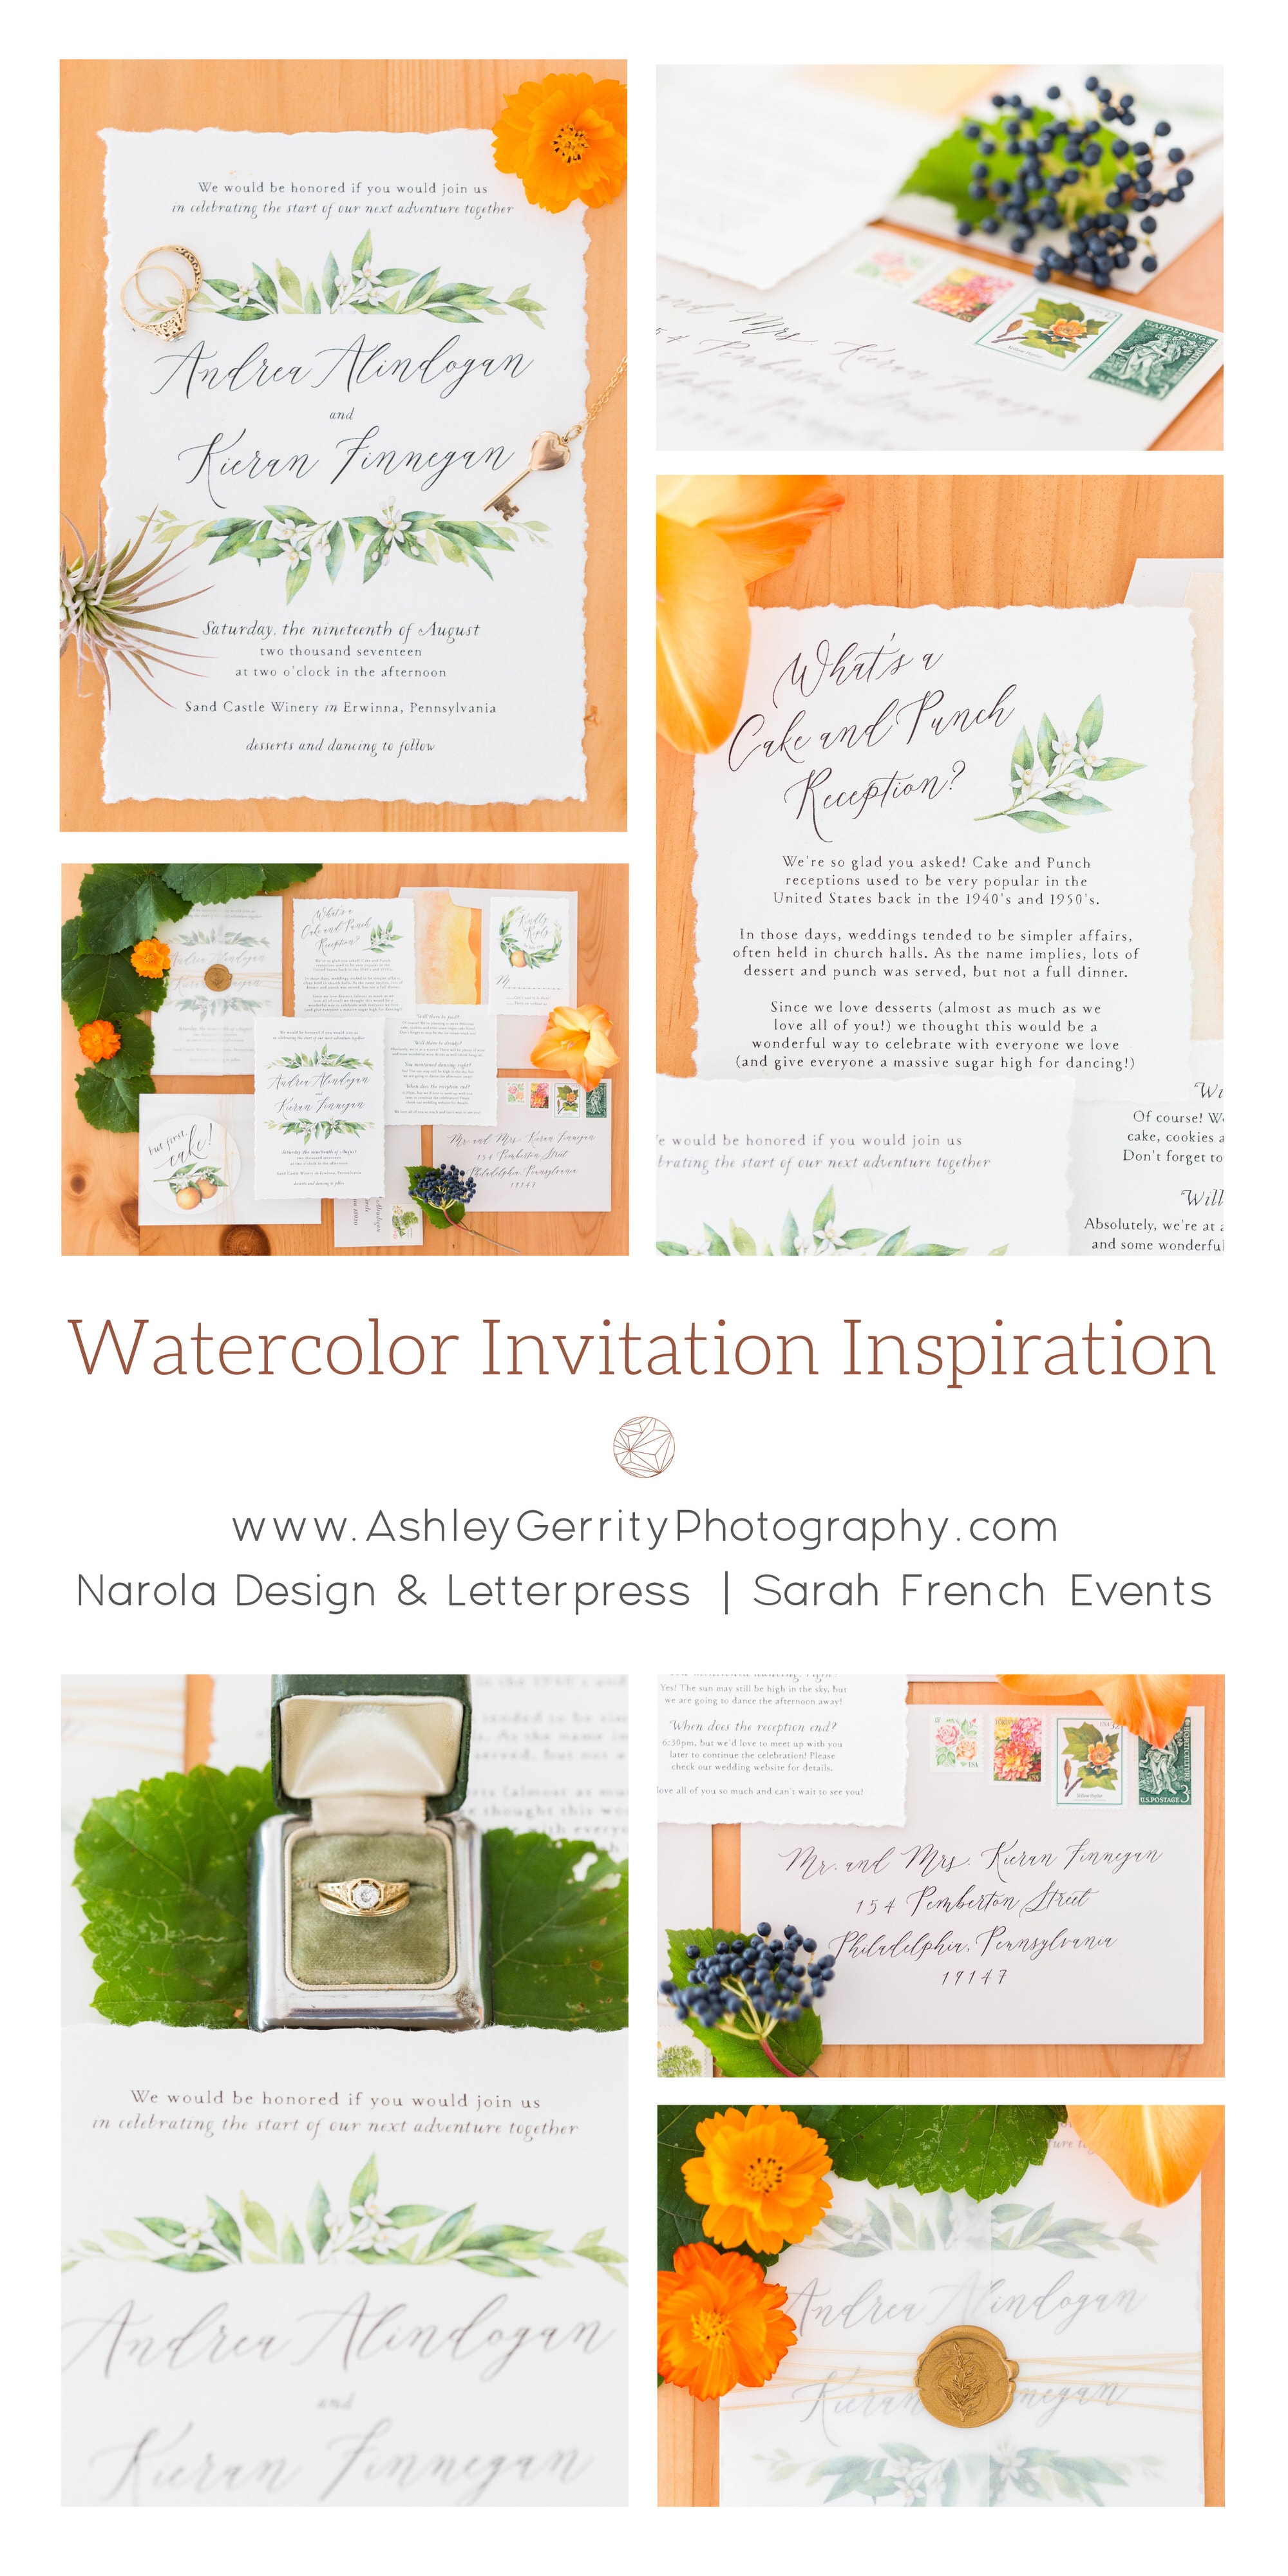 Hand-painted watercolor wedding invitation suite with calligraphy. Citrus, orange and greenery, vintage golds wedding bands with hand-lettered wedding invite